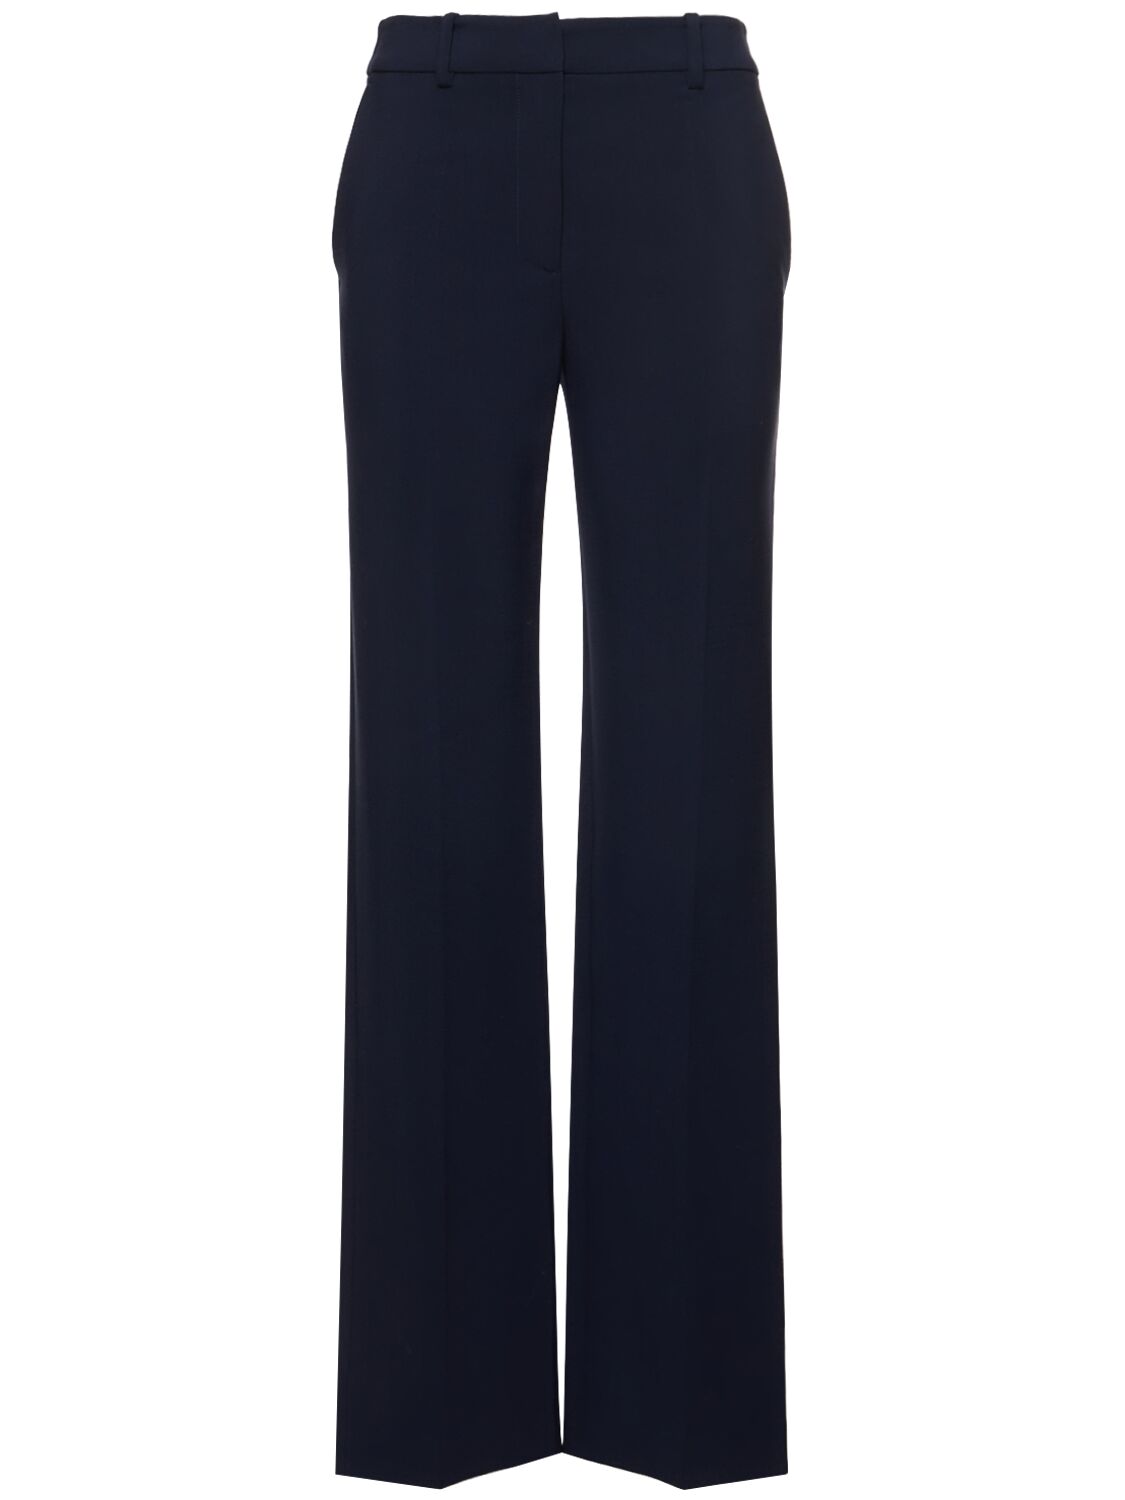 Tailored Stretch Wool Pants – WOMEN > CLOTHING > PANTS